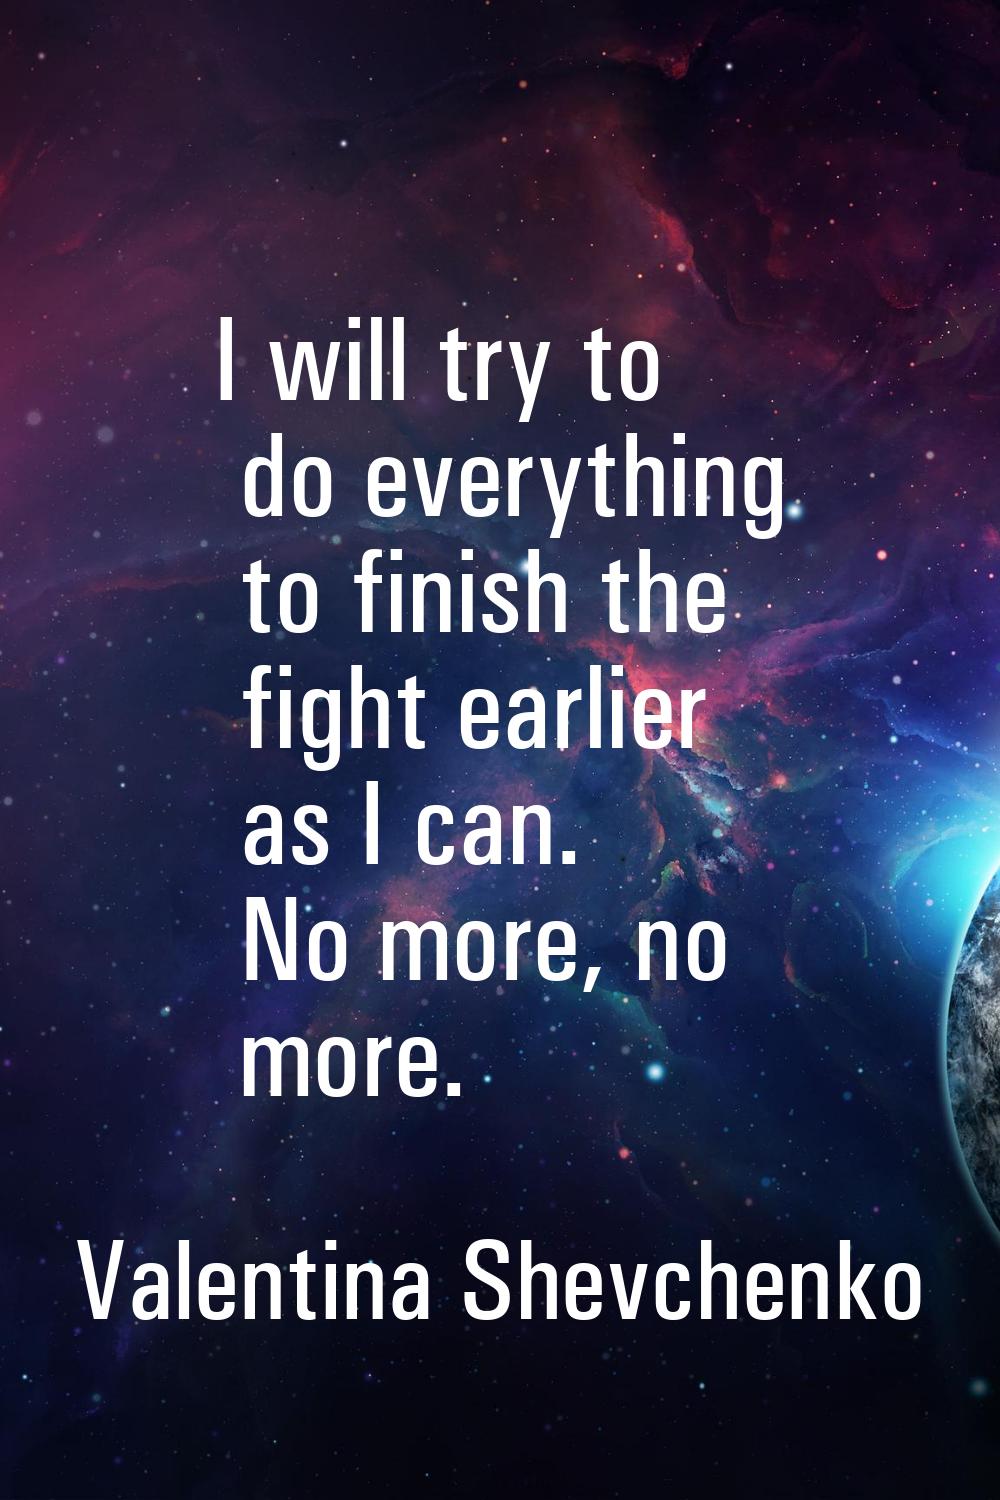 I will try to do everything to finish the fight earlier as I can. No more, no more.